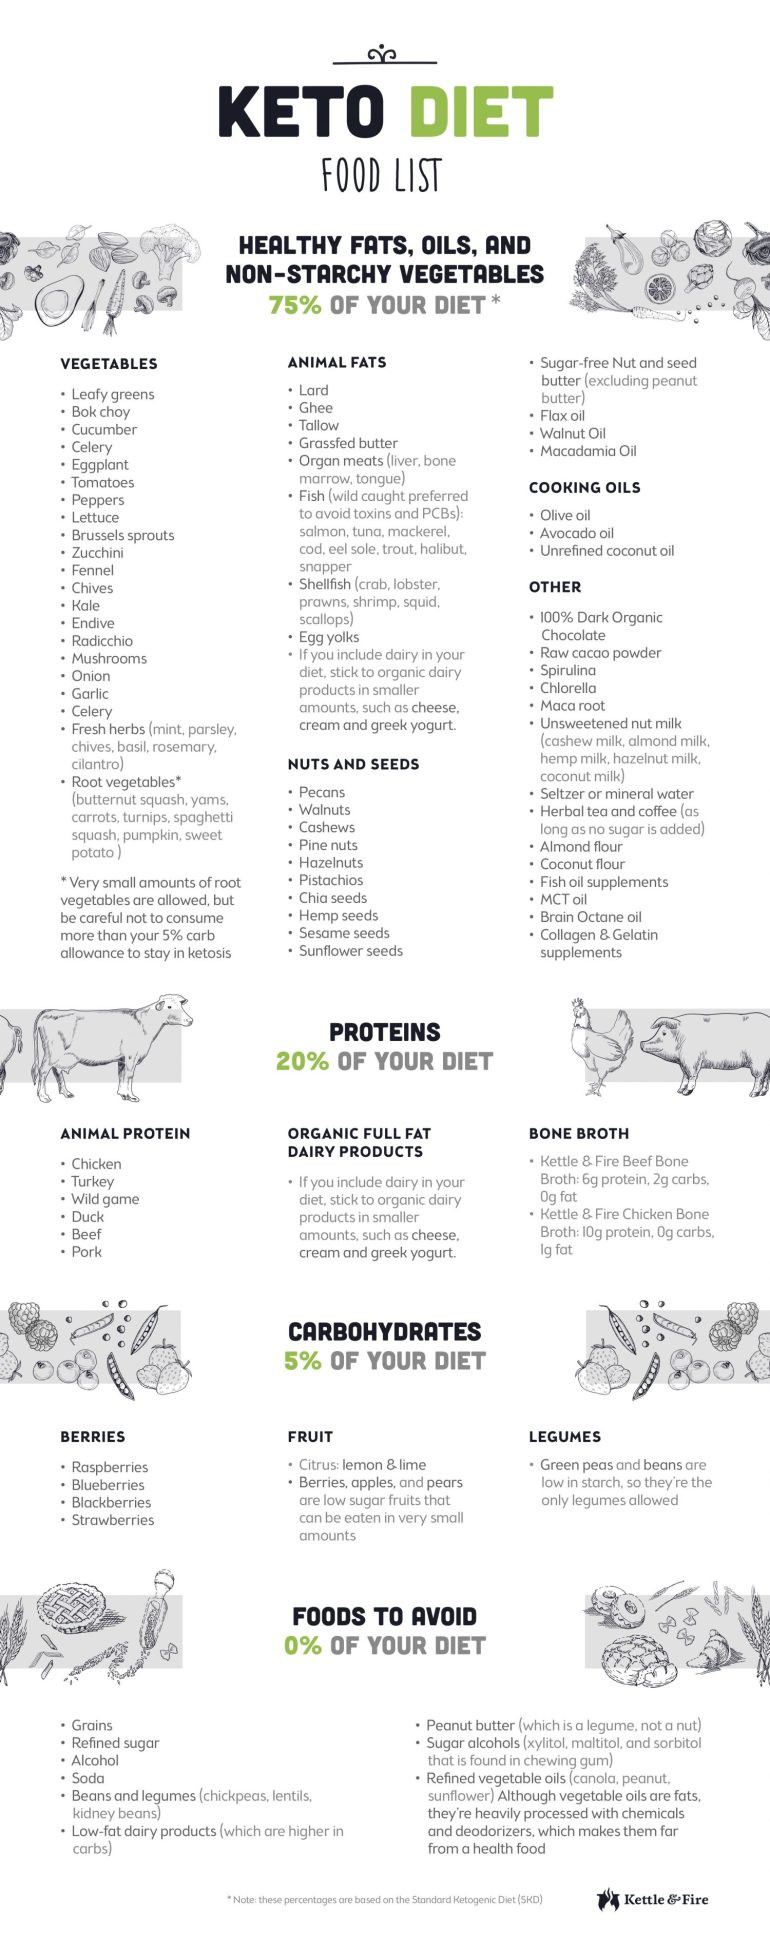 Keto Diet Grocery List And Meal Plan
 The Ultimate Keto Diet Beginner s Guide & Grocery List